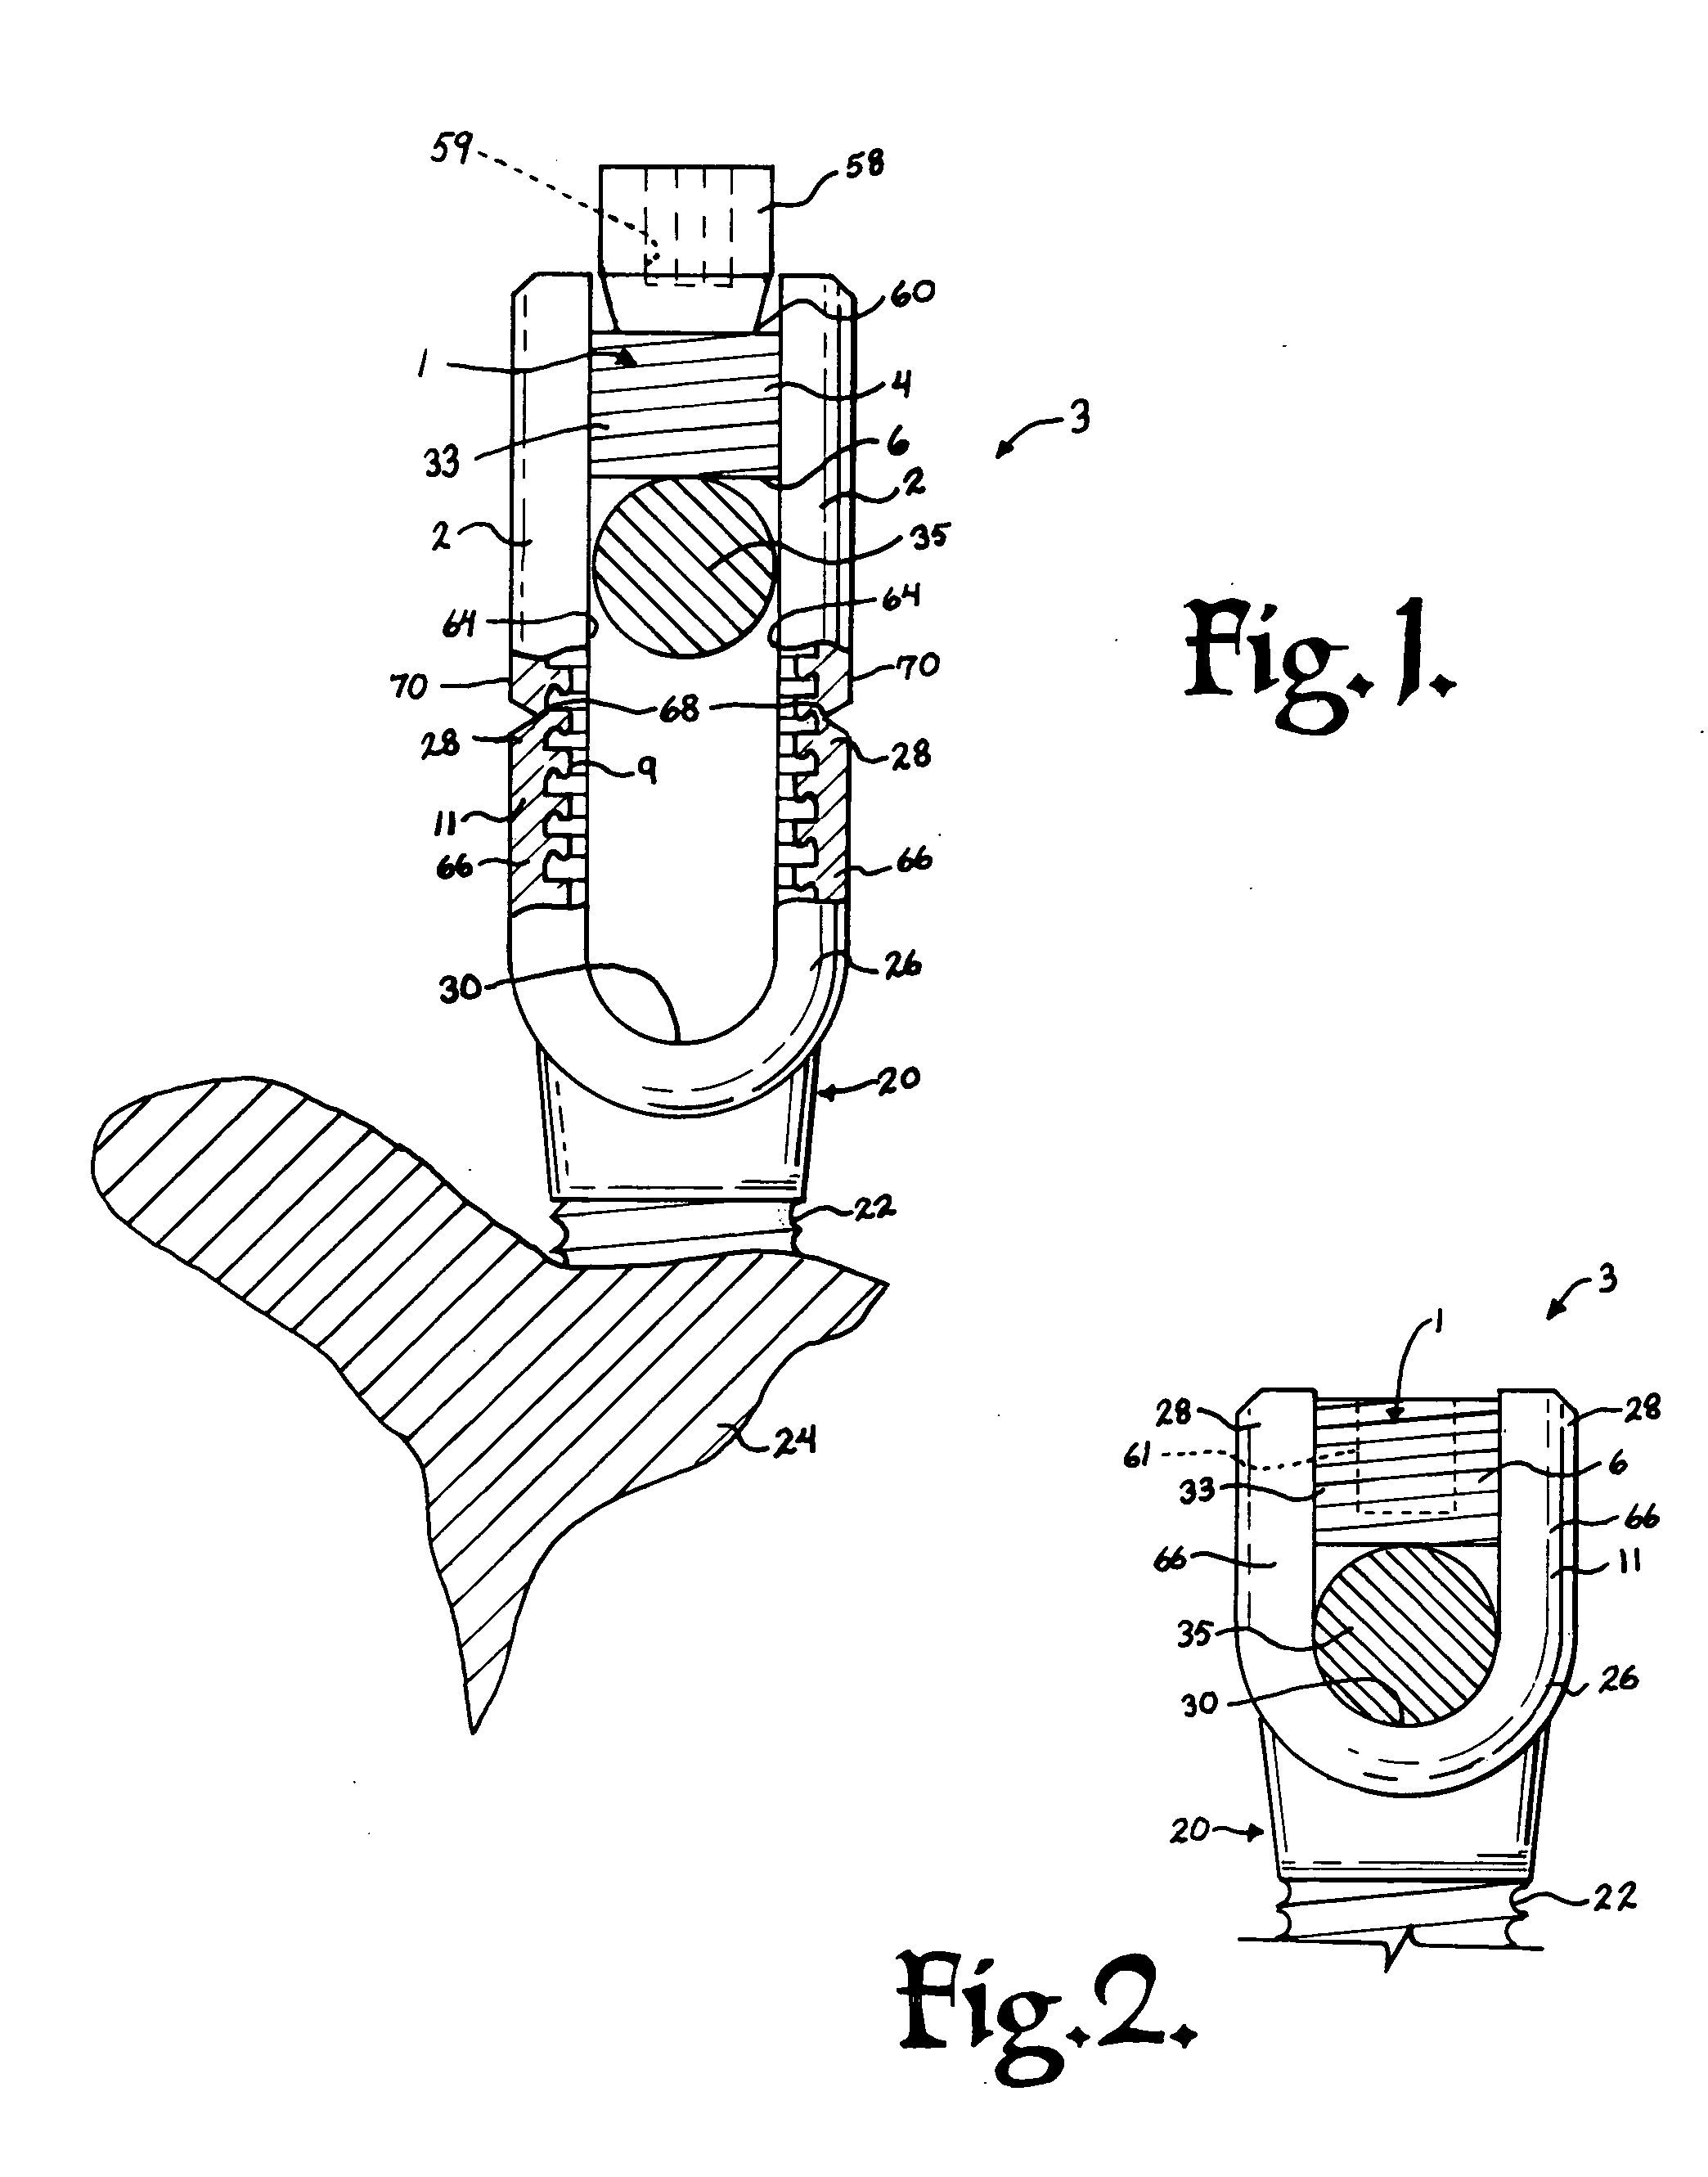 Helical guide and advancement flange with radially loaded lip